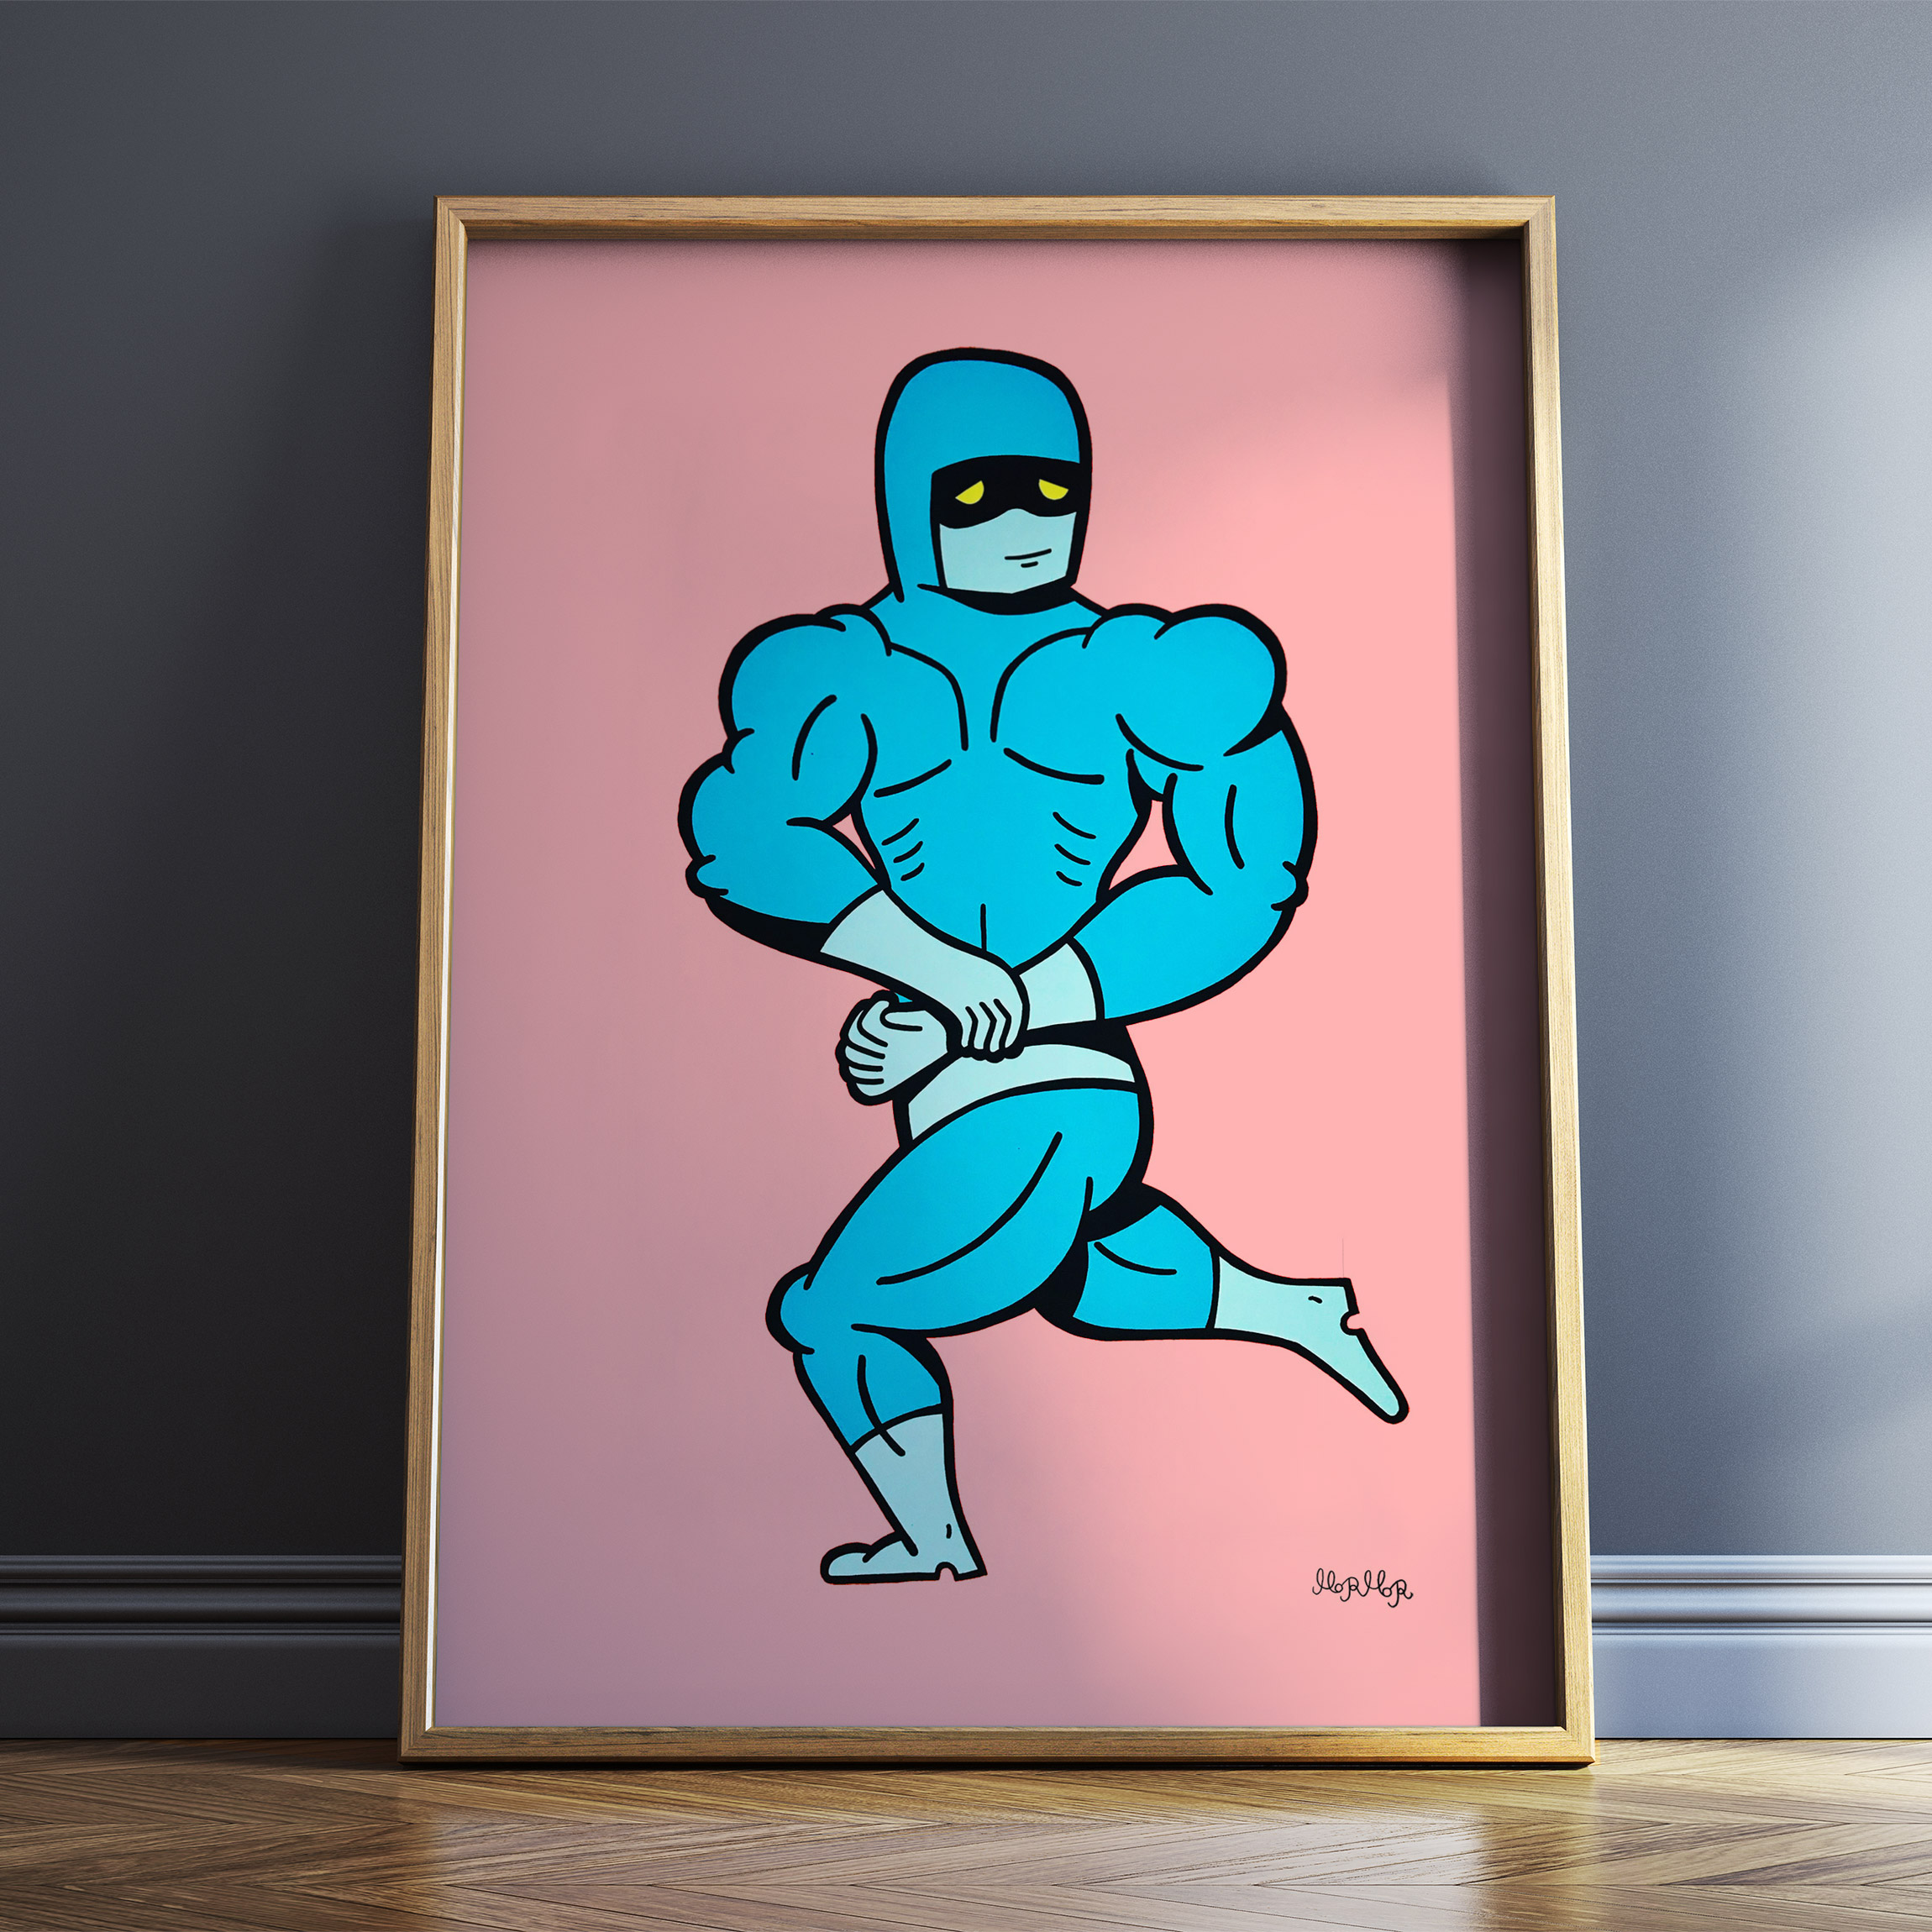 posters-prints, giclee-print, family-friendly, illustrative, pop, bodies, cartoons, humor, black, blue, red, ink, paper, amusing, danish, decorative, design, interior, interior-design, men, nordic, scandinavien, sketch, street-art, Buy original high quality art. Paintings, drawings, limited edition prints & posters by talented artists.